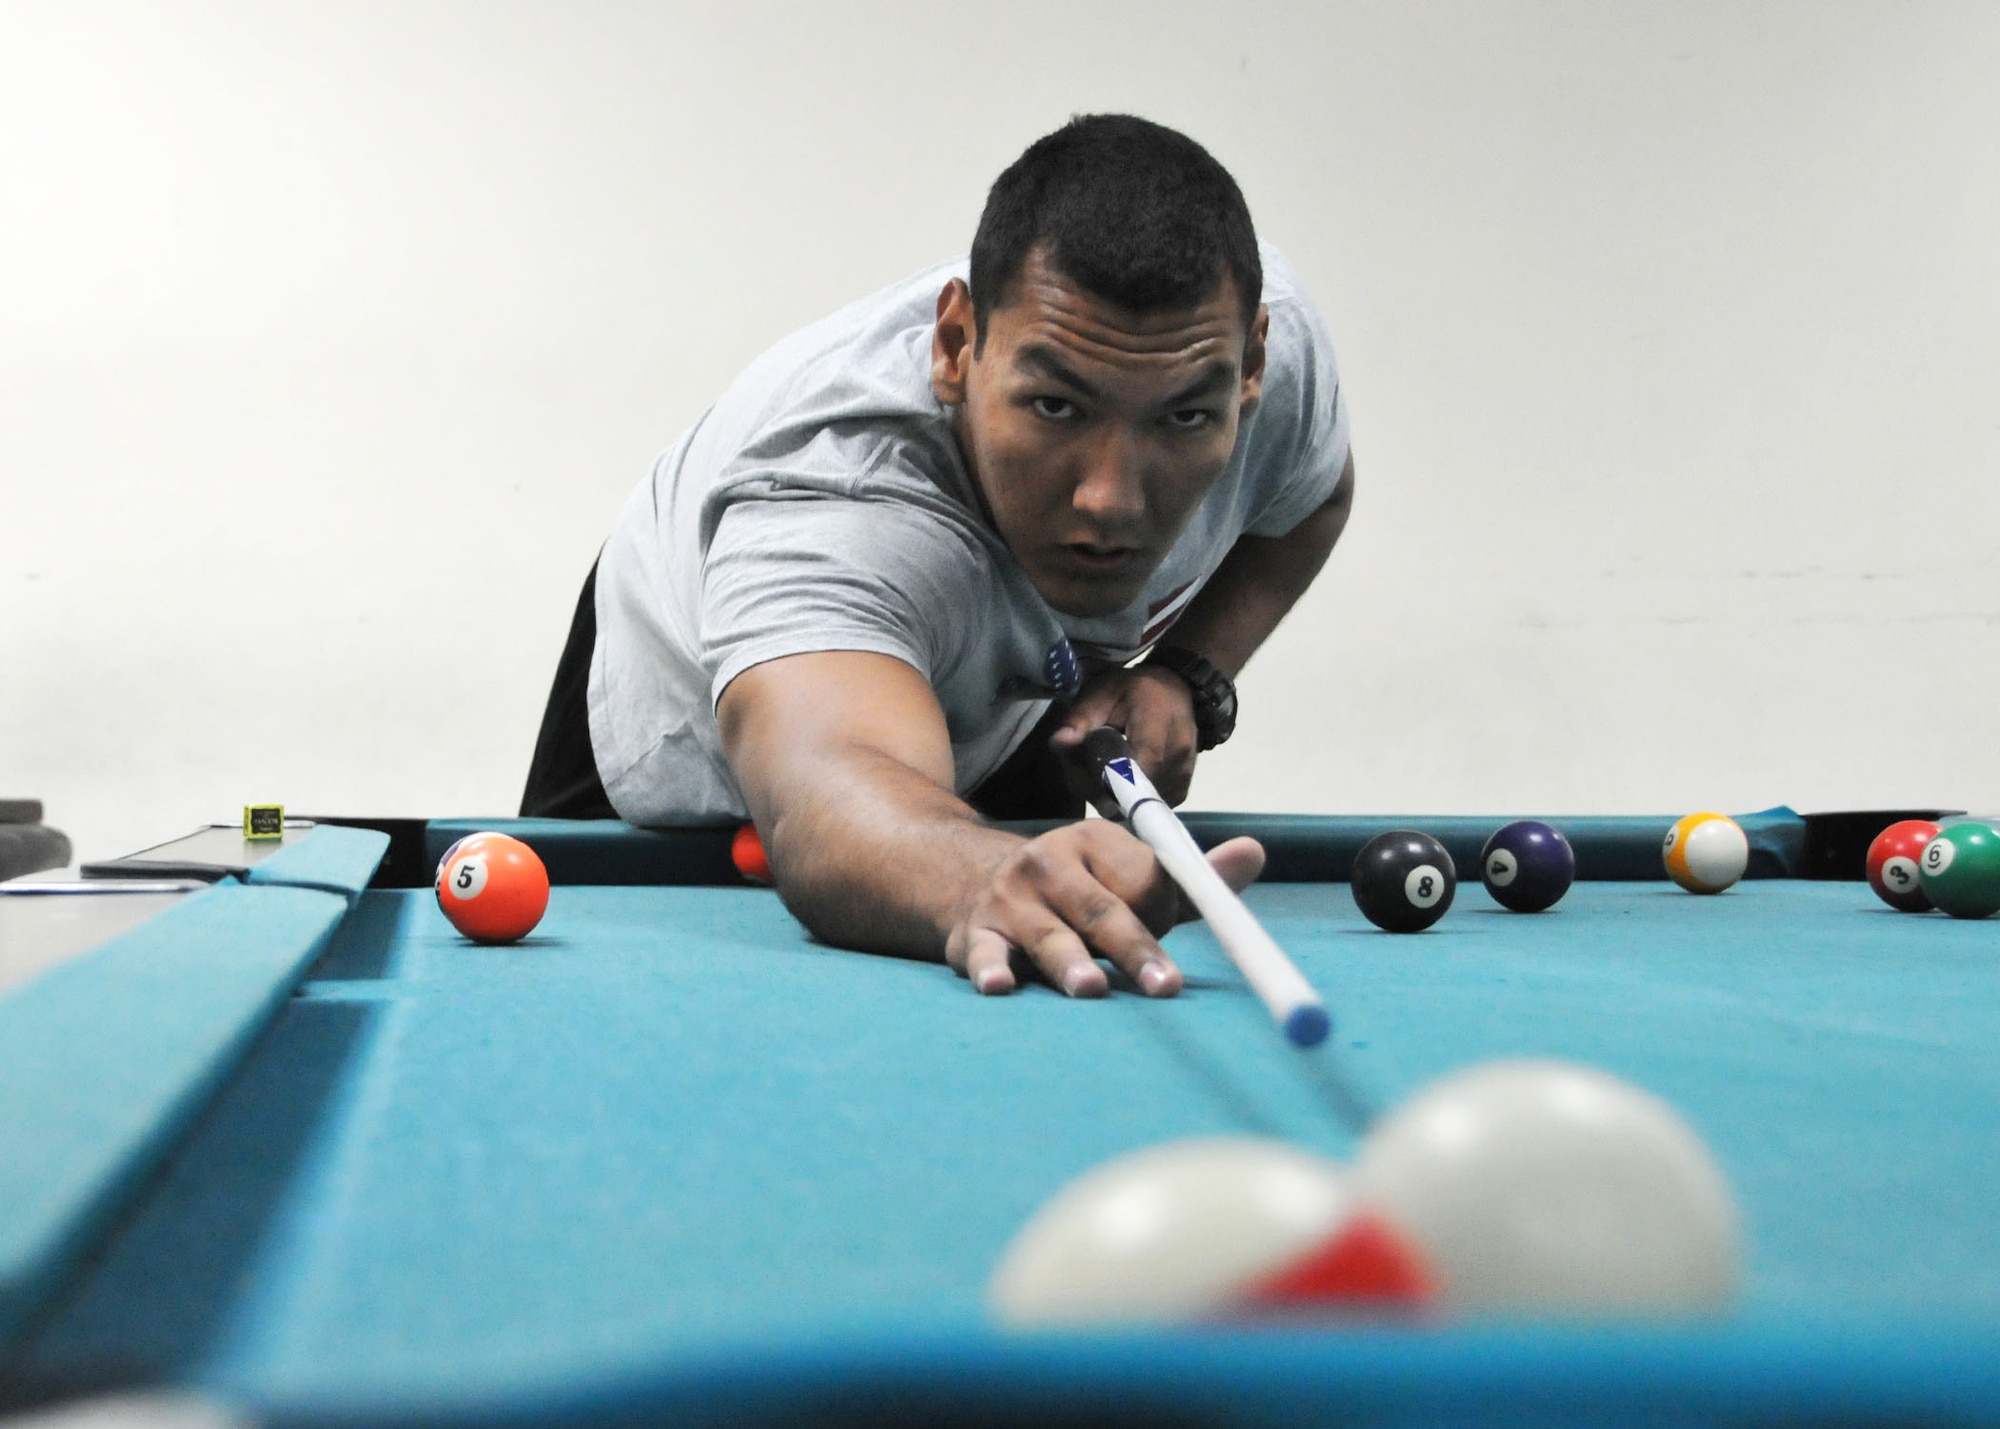 Air Force Senior Airman Troy Marquez attempts to cut the 13 ball into the corner pocket during a game of pool at the 380th Air Expeditionary Wing’s community activities center at an undisclosed location of Southwest Asia June 1, 2014.  (U.S. Air Force photo by Senior Master Sgt. Eric Peterson/Released)